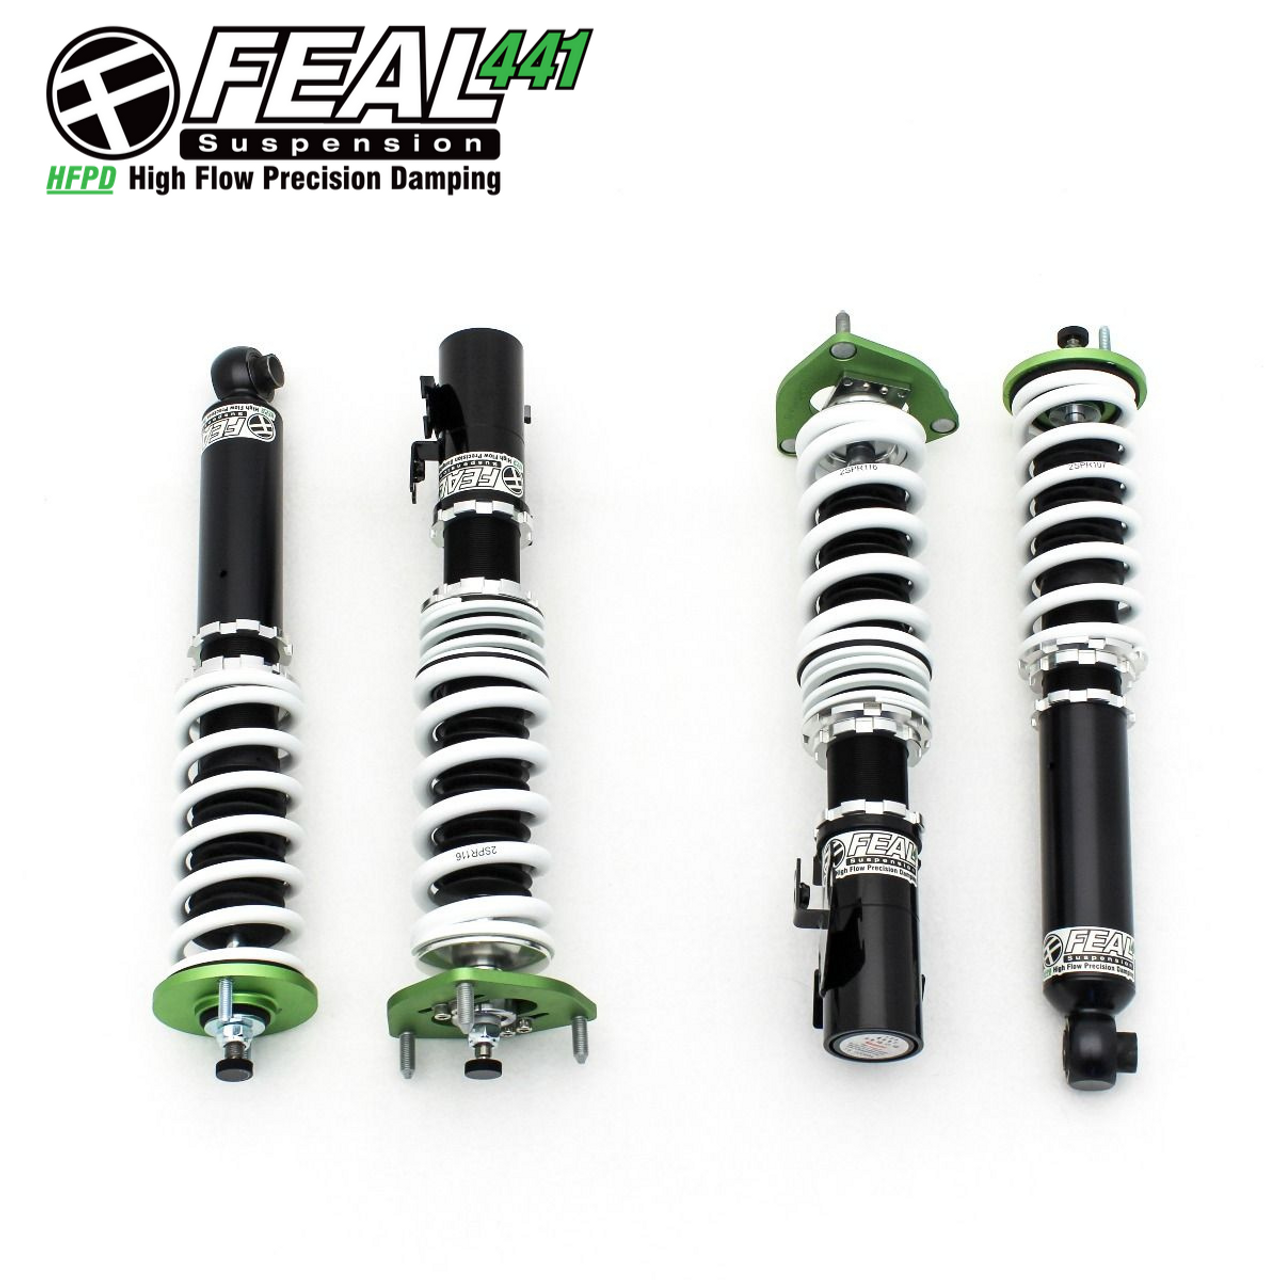 Feal Suspension 441 Coilover Kit, RWD - Nissan R32 GTS-T